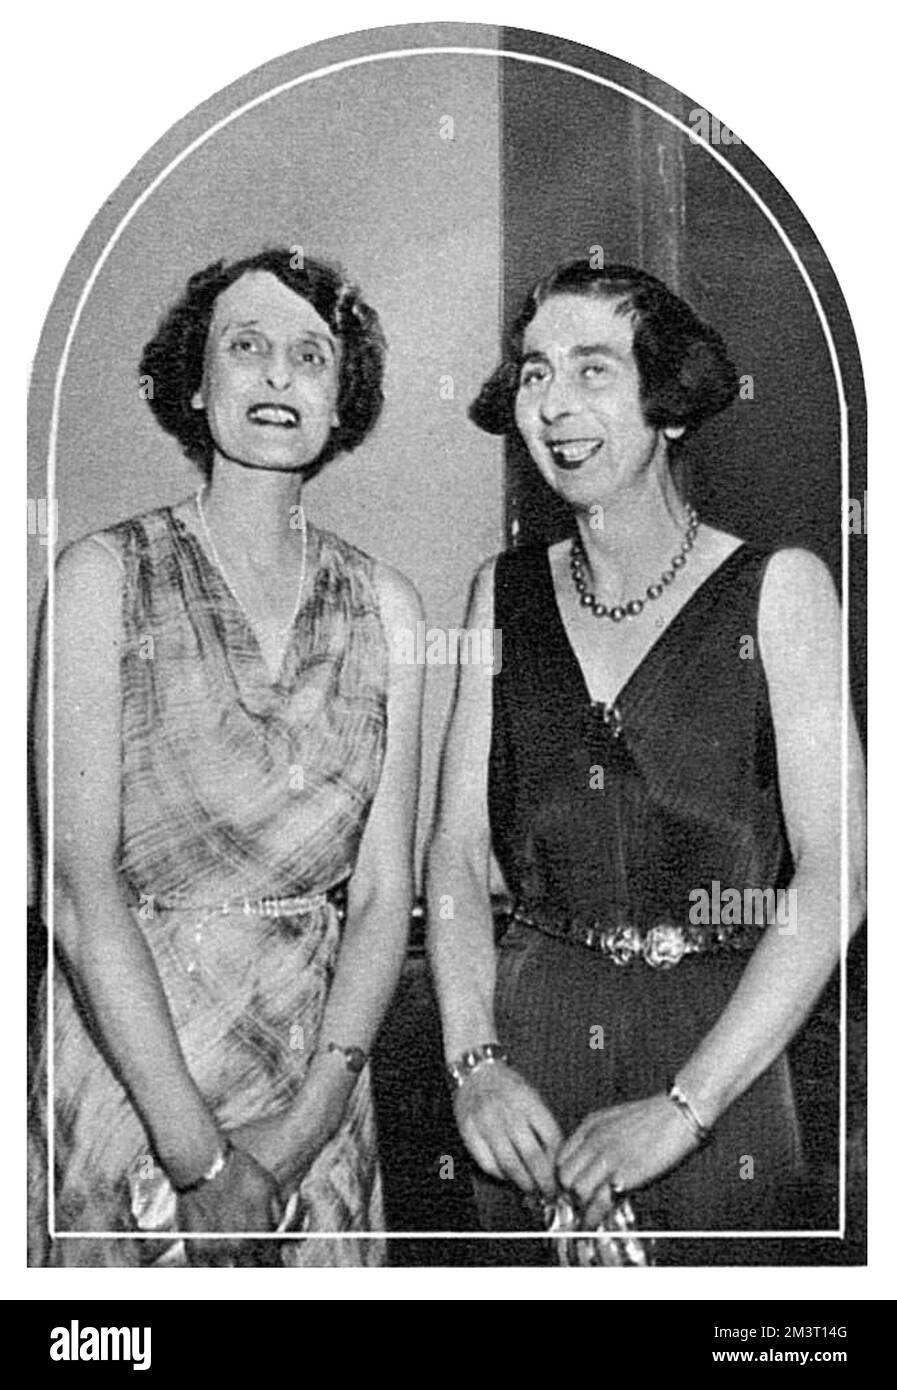 The prolific English author Edmee Elizabeth Monica Dashwood (1890-1943), commonly known as E. M. Delafield, and Lorna Lewis, British writer (?-1962) at Viscountess Rhondda's Literary 'Rout' (an evening party in Bloomsbury, London). Stock Photo